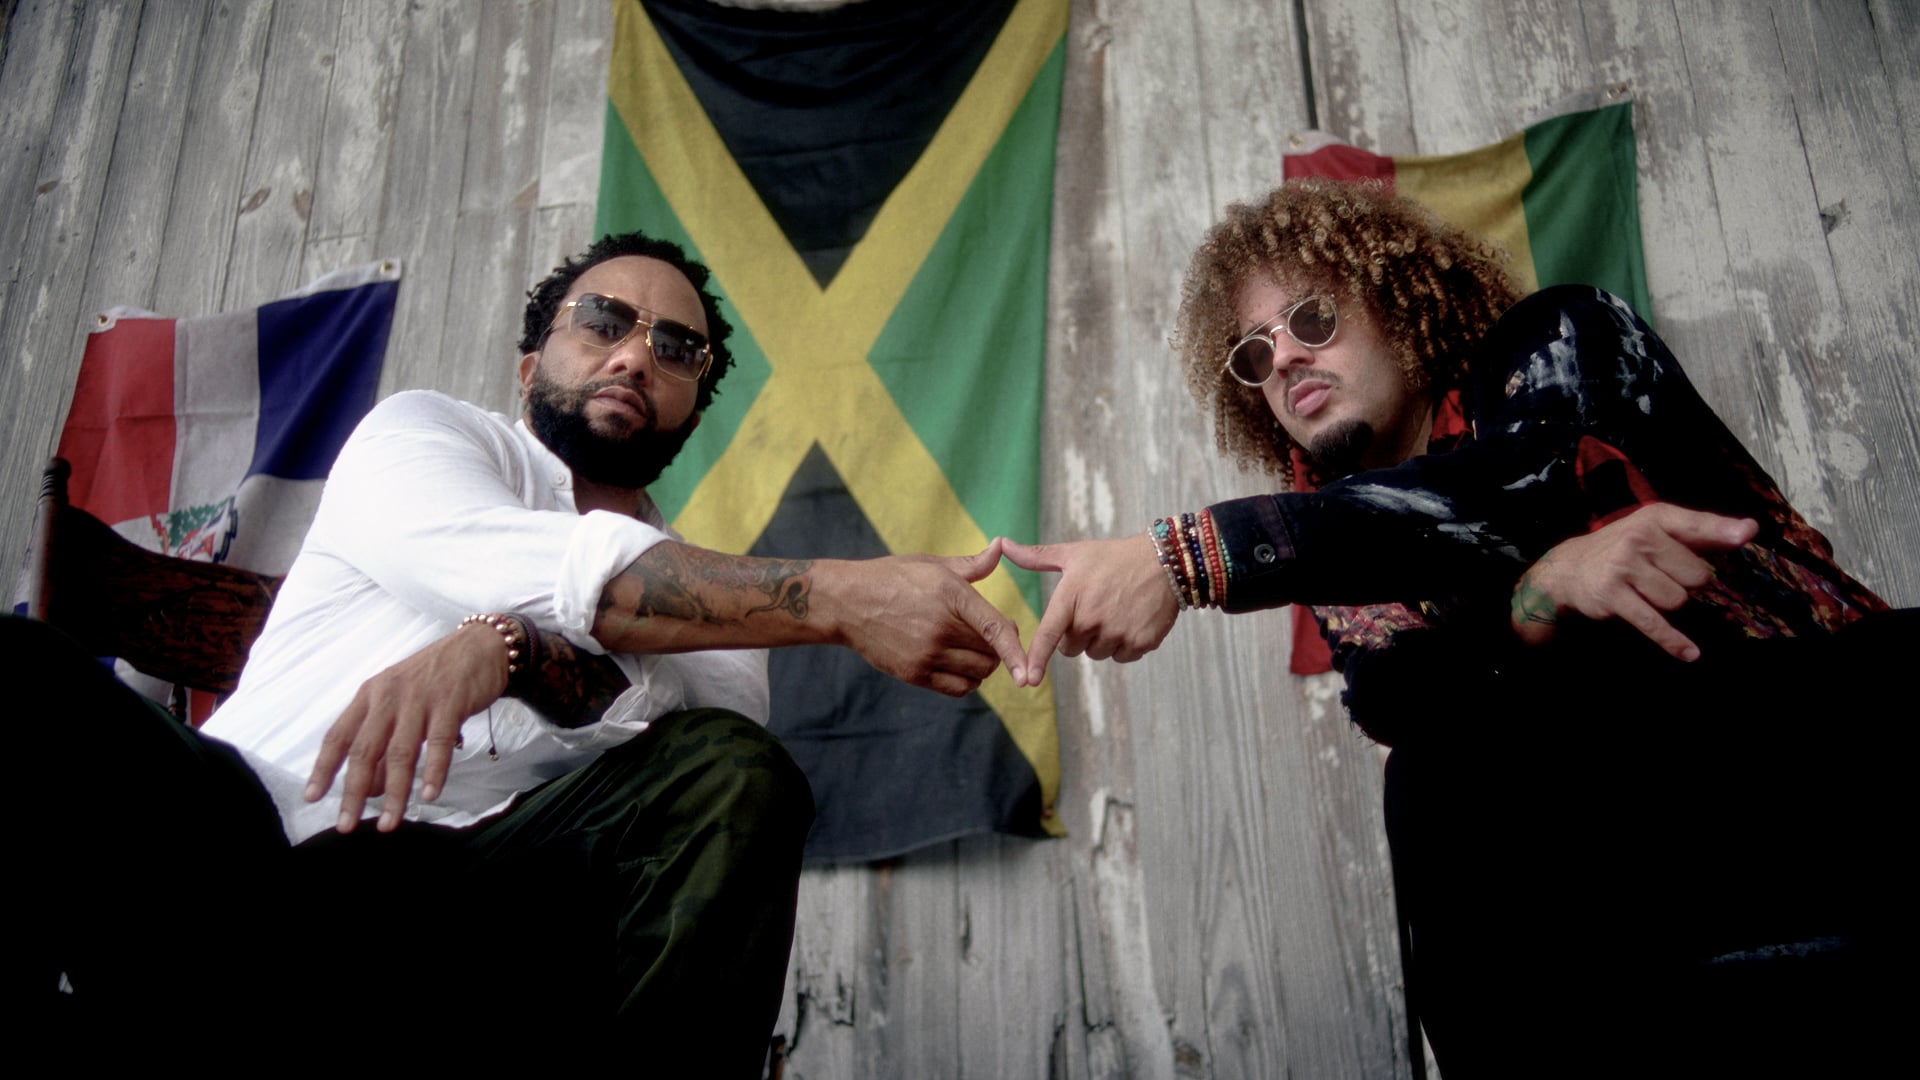 Mike Russell "Blessings" (Official Music Video) - Maffio - Julian Marley - Ky-Mani Marley - Feat. Jo Mersa Marley